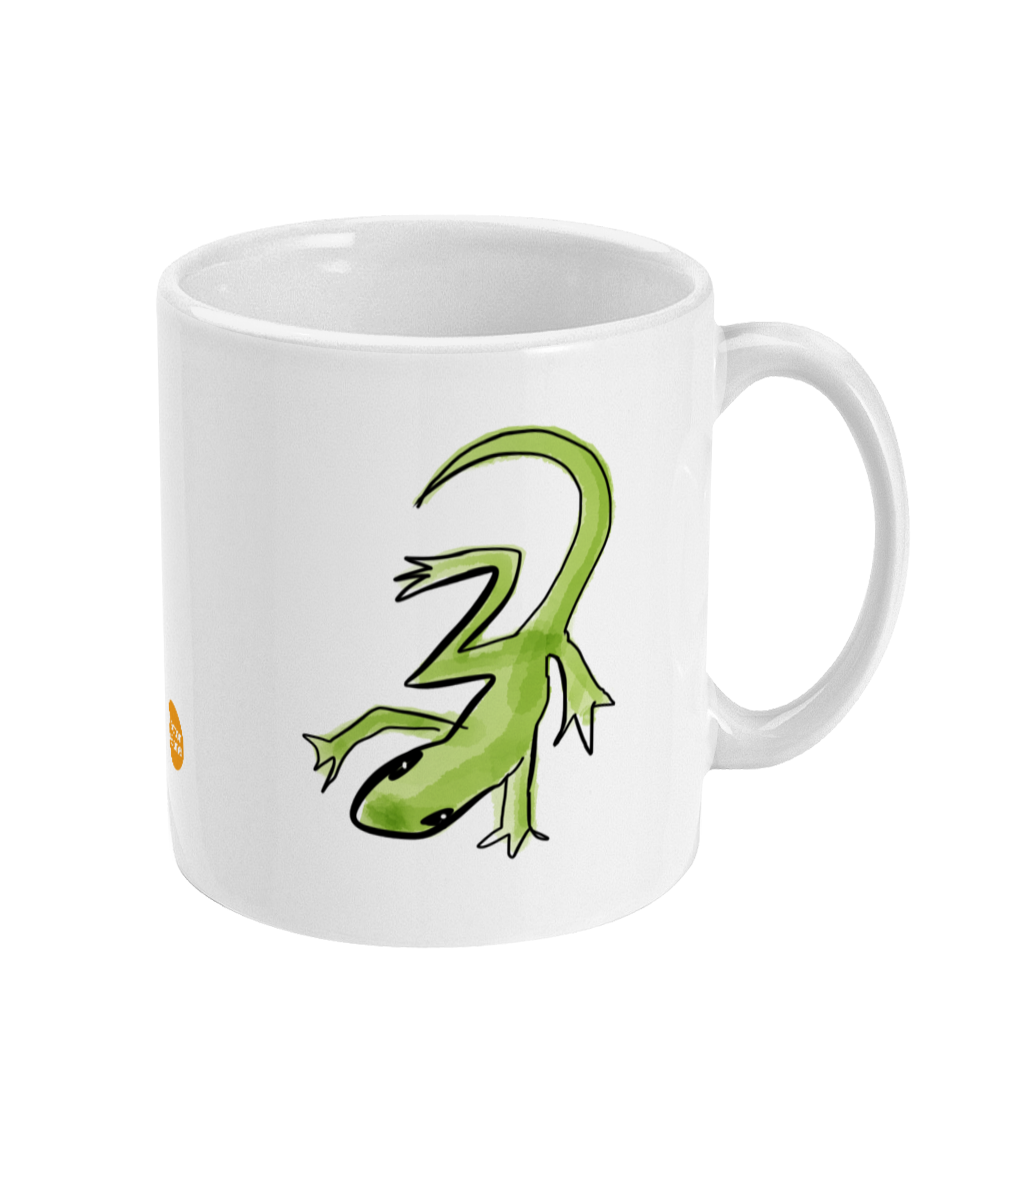 Lounge Lizard mug design by Hector and Bone Right View